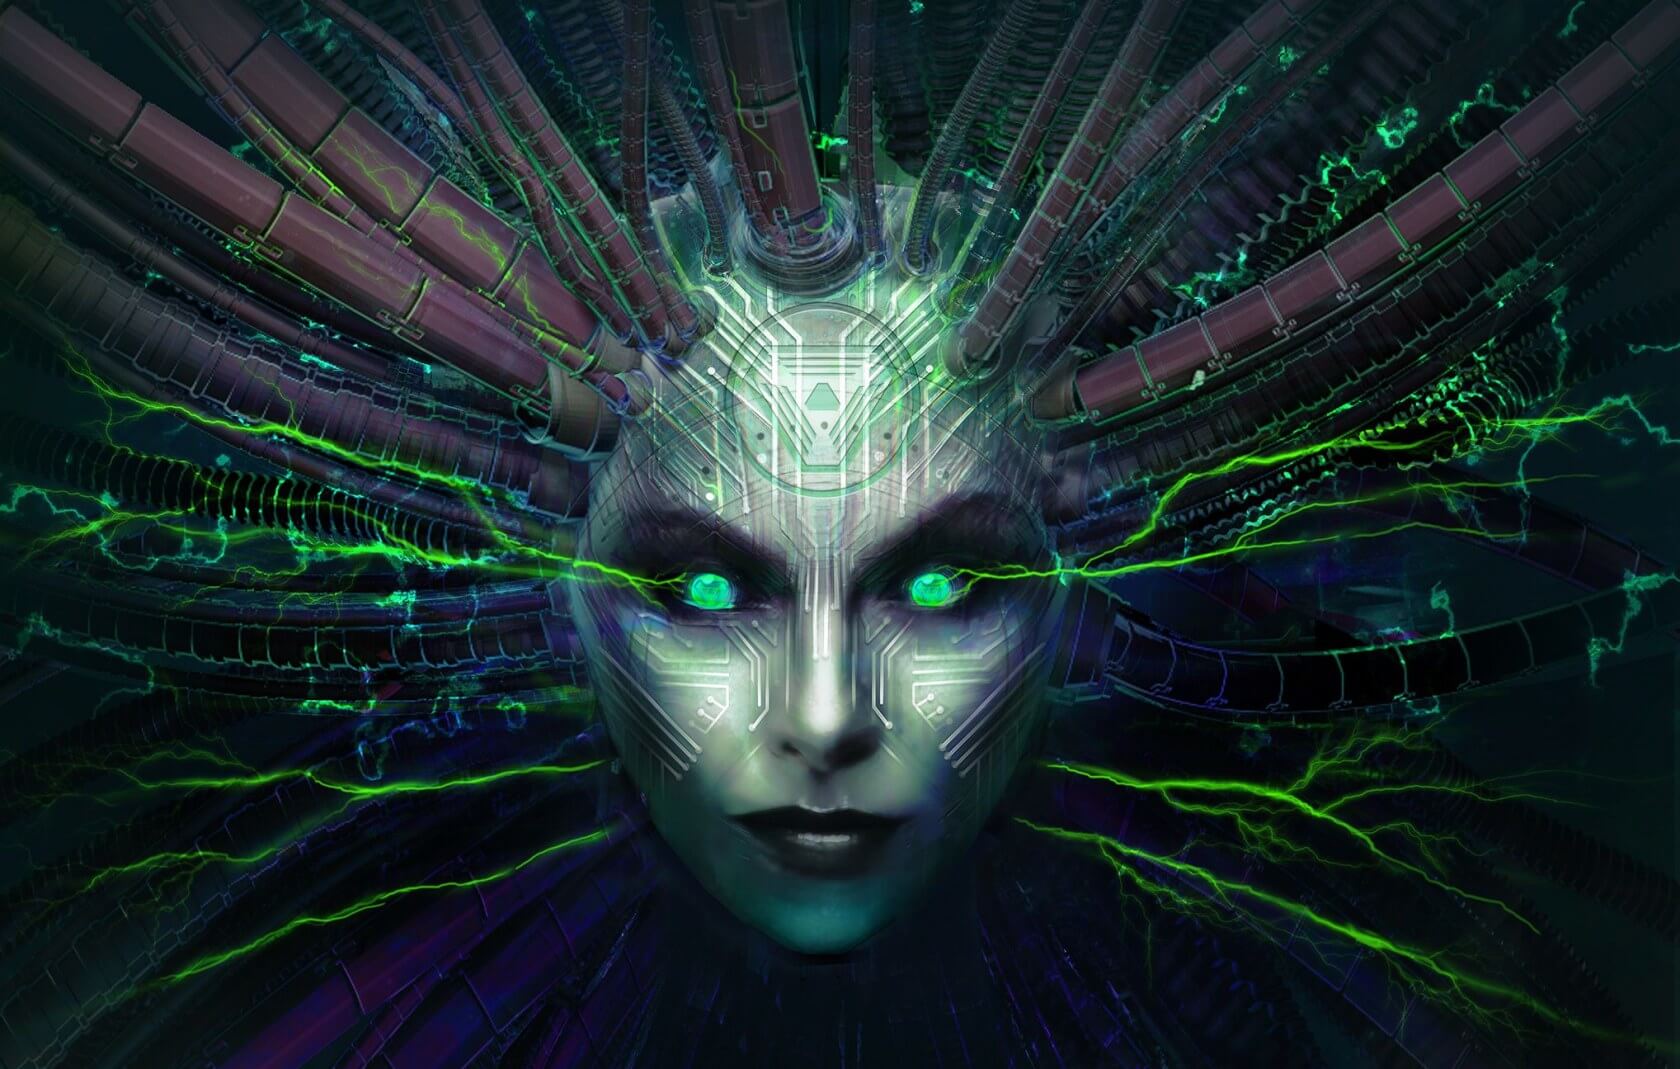 Otherside Entertainment shows off System Shock 3 gameplay snippet at GDC